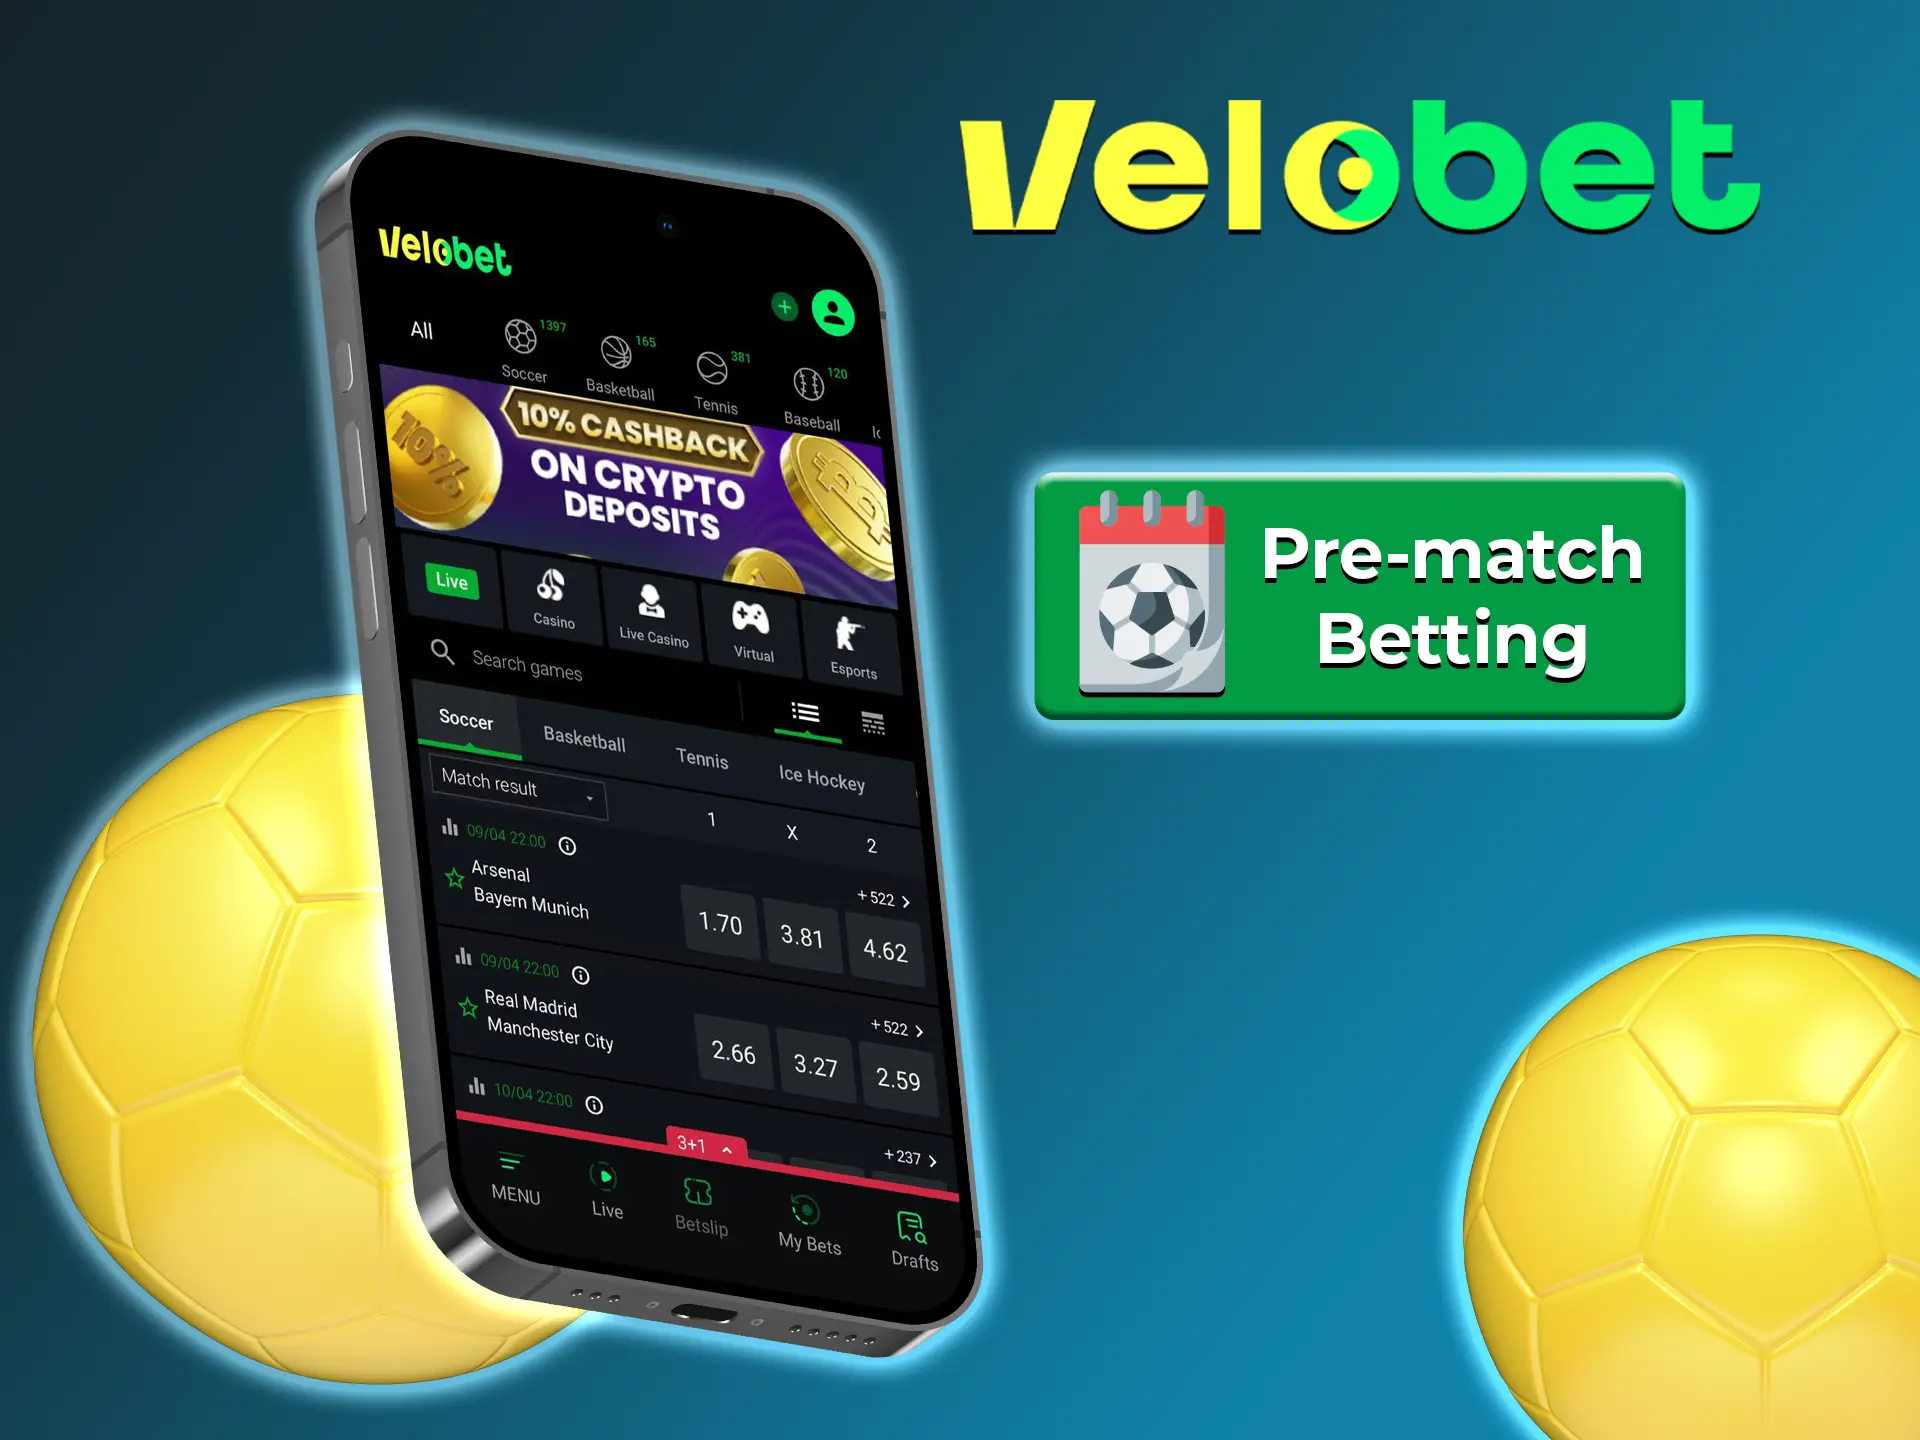 Place a bet before the match at Velobet if you see a favourite in this clash.